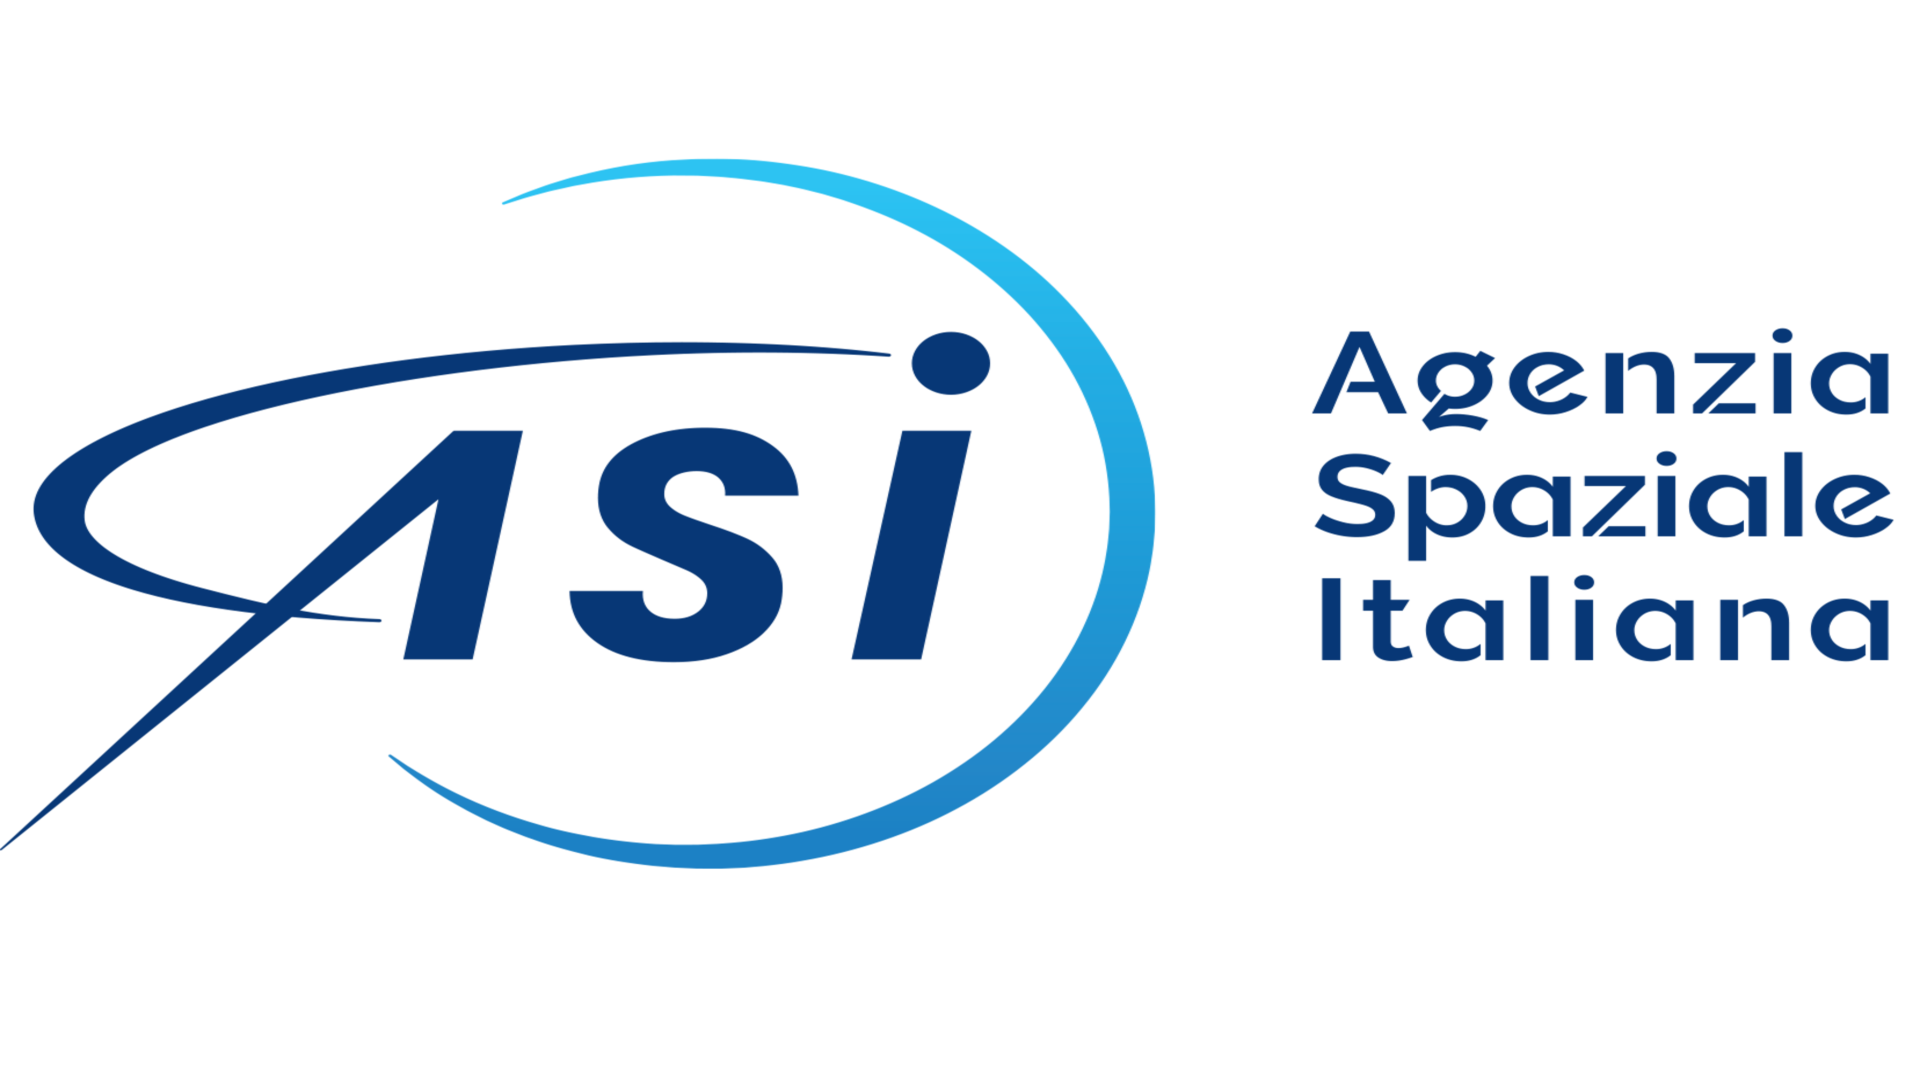 ASI HAS A NEW GENERAL DIRECTOR – LUCA VINCENZO MARIA SALAMONE IS THE AGENCY’S TOP ADMINISTRATOR